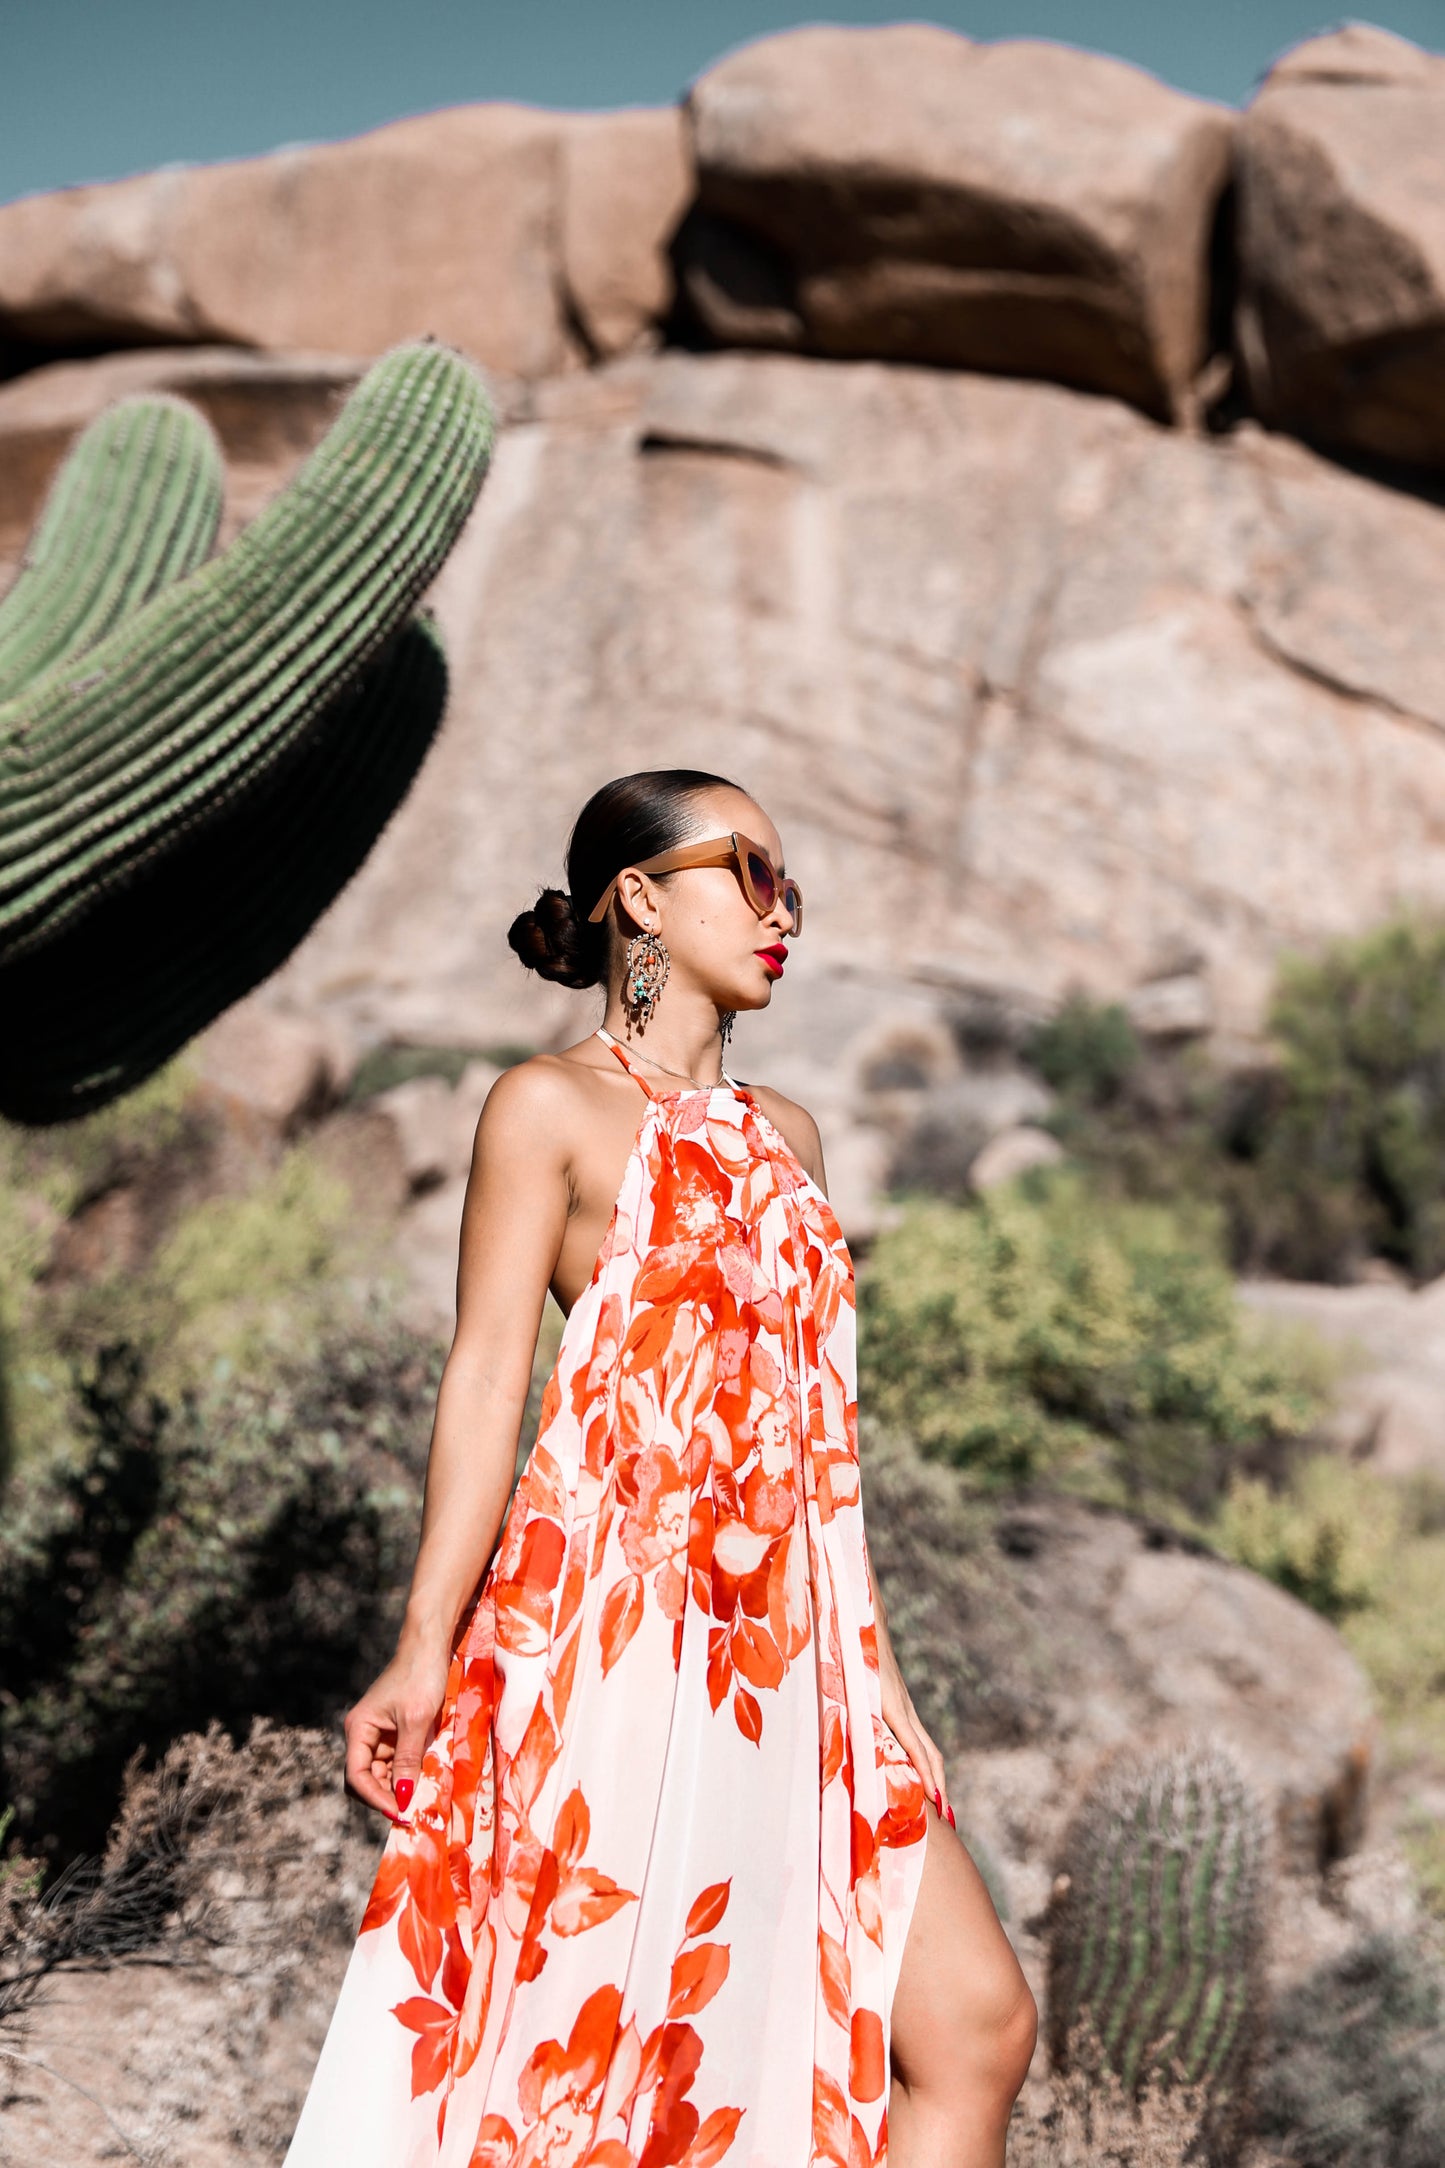 MADE TO ORDER: The Phoenix Floral Dress